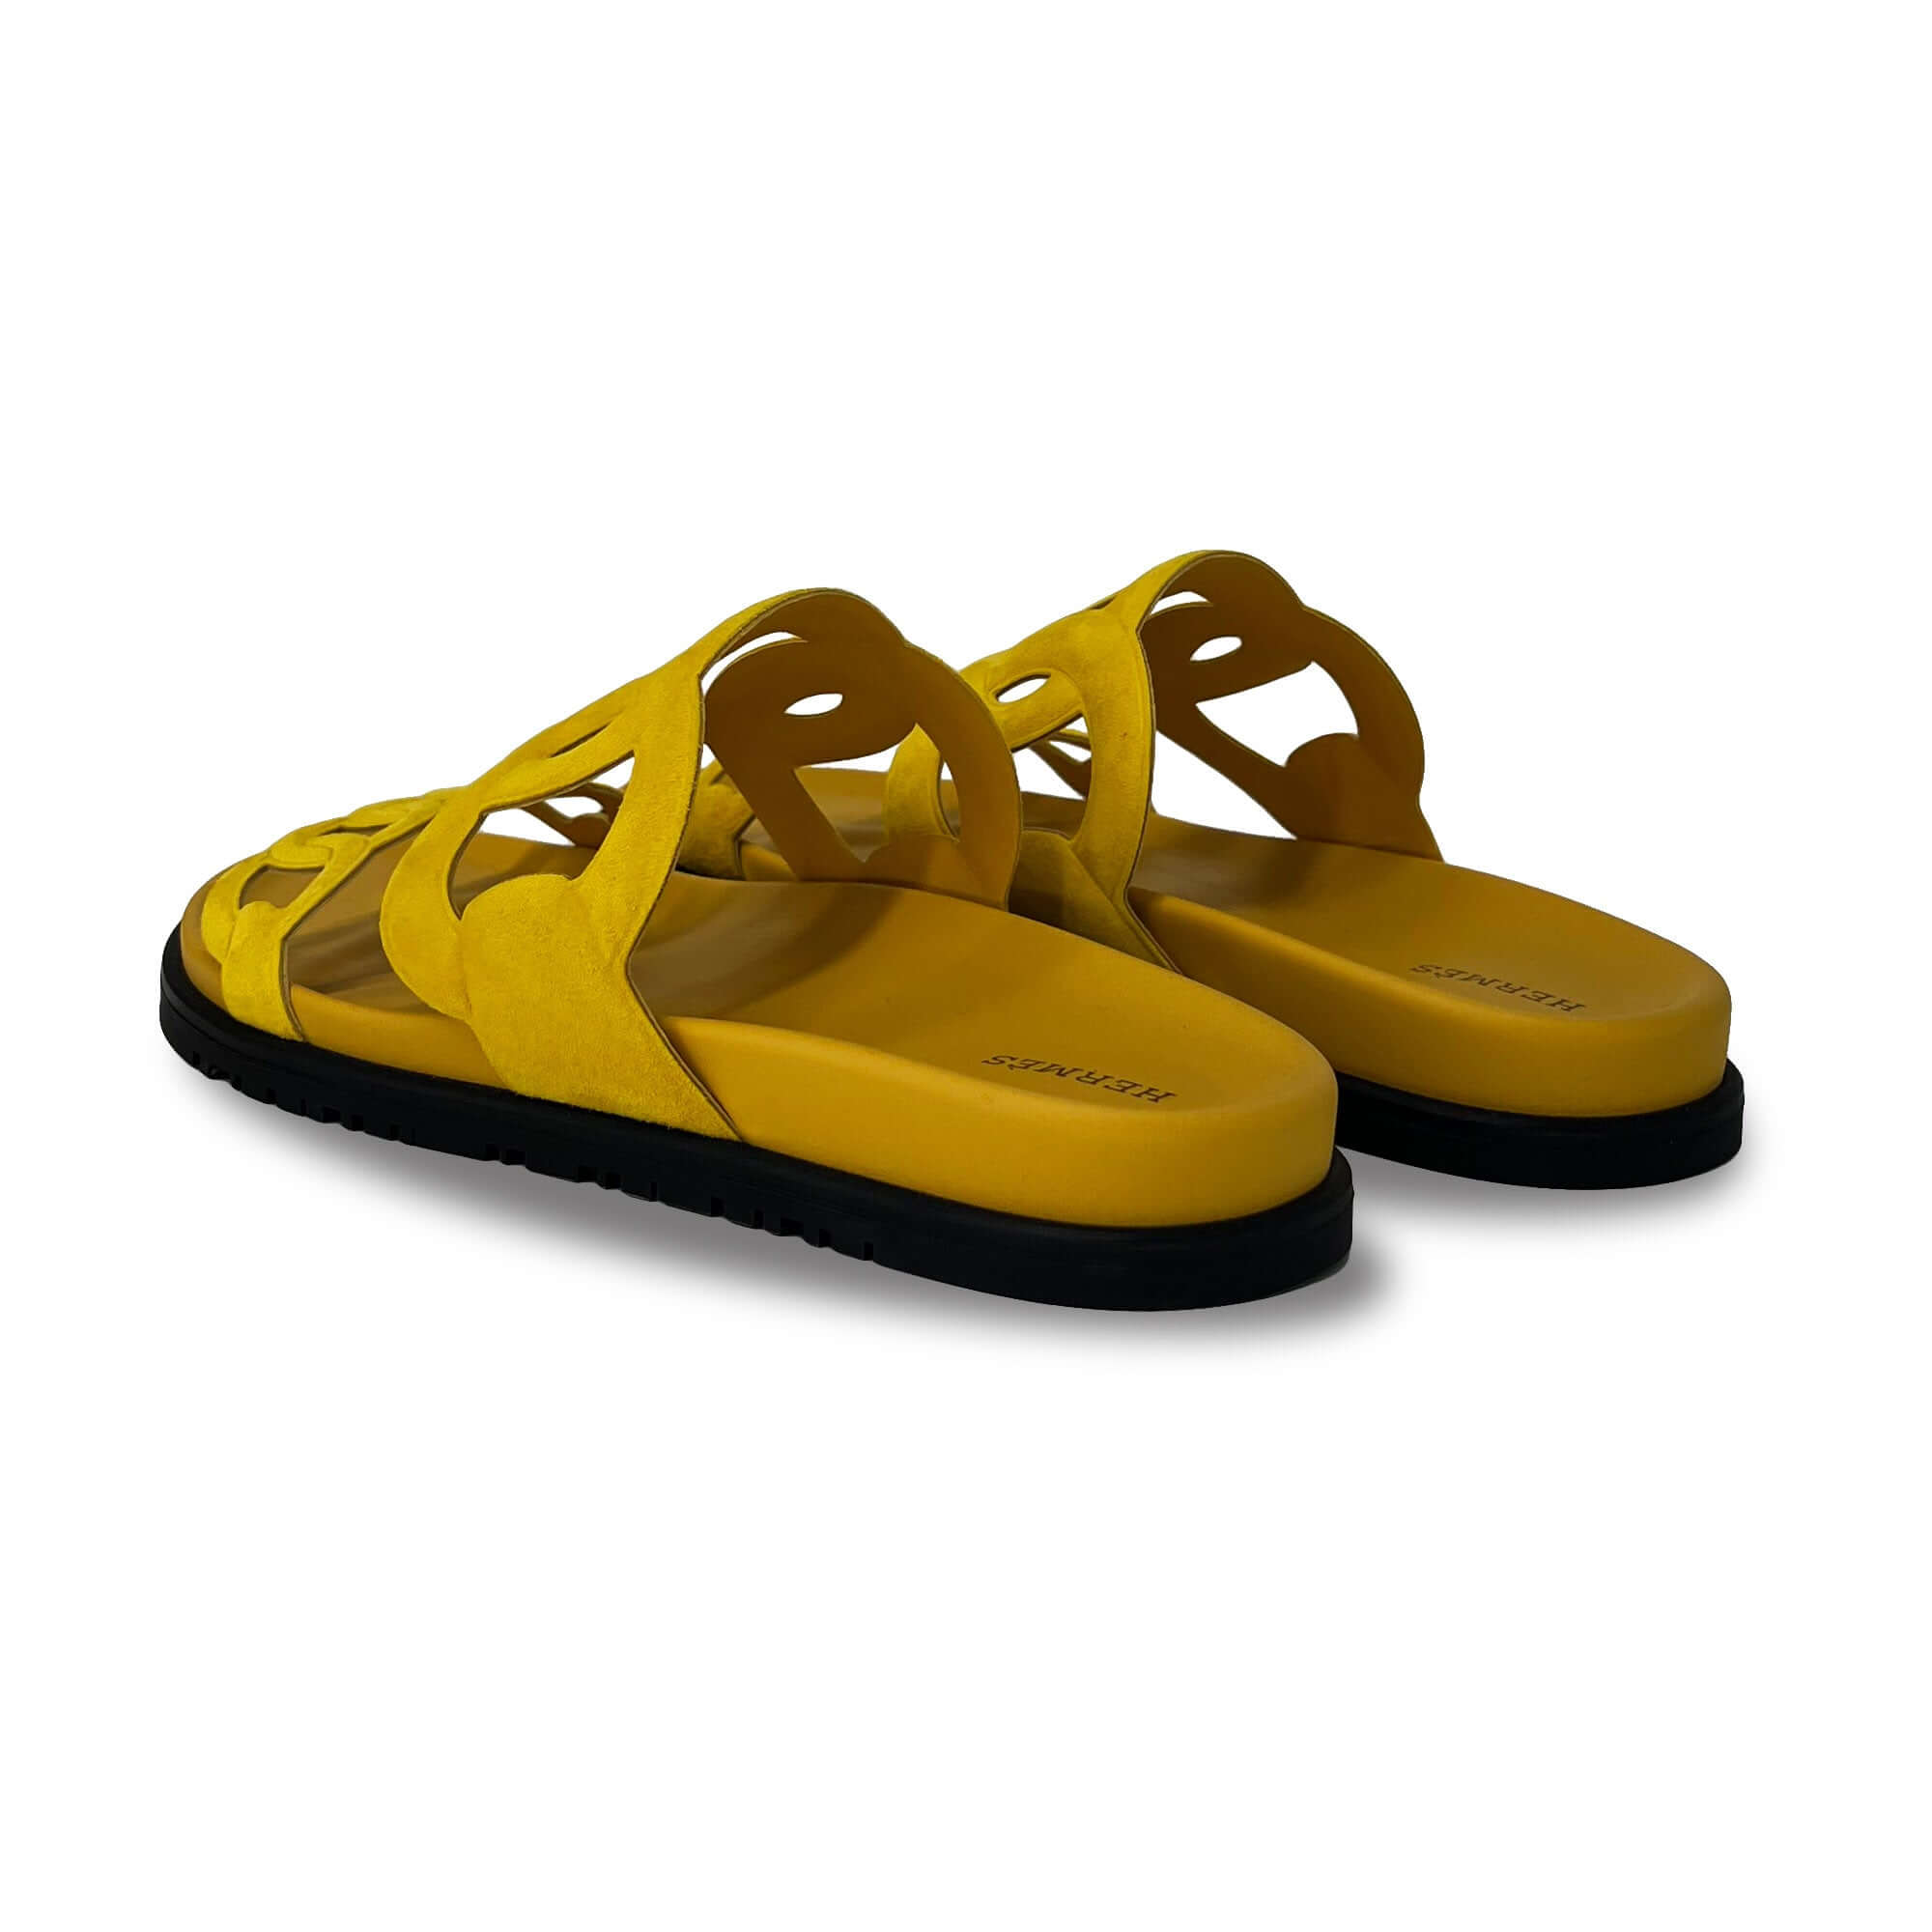 Hermes Extra Designer Sandals in yellow back angle